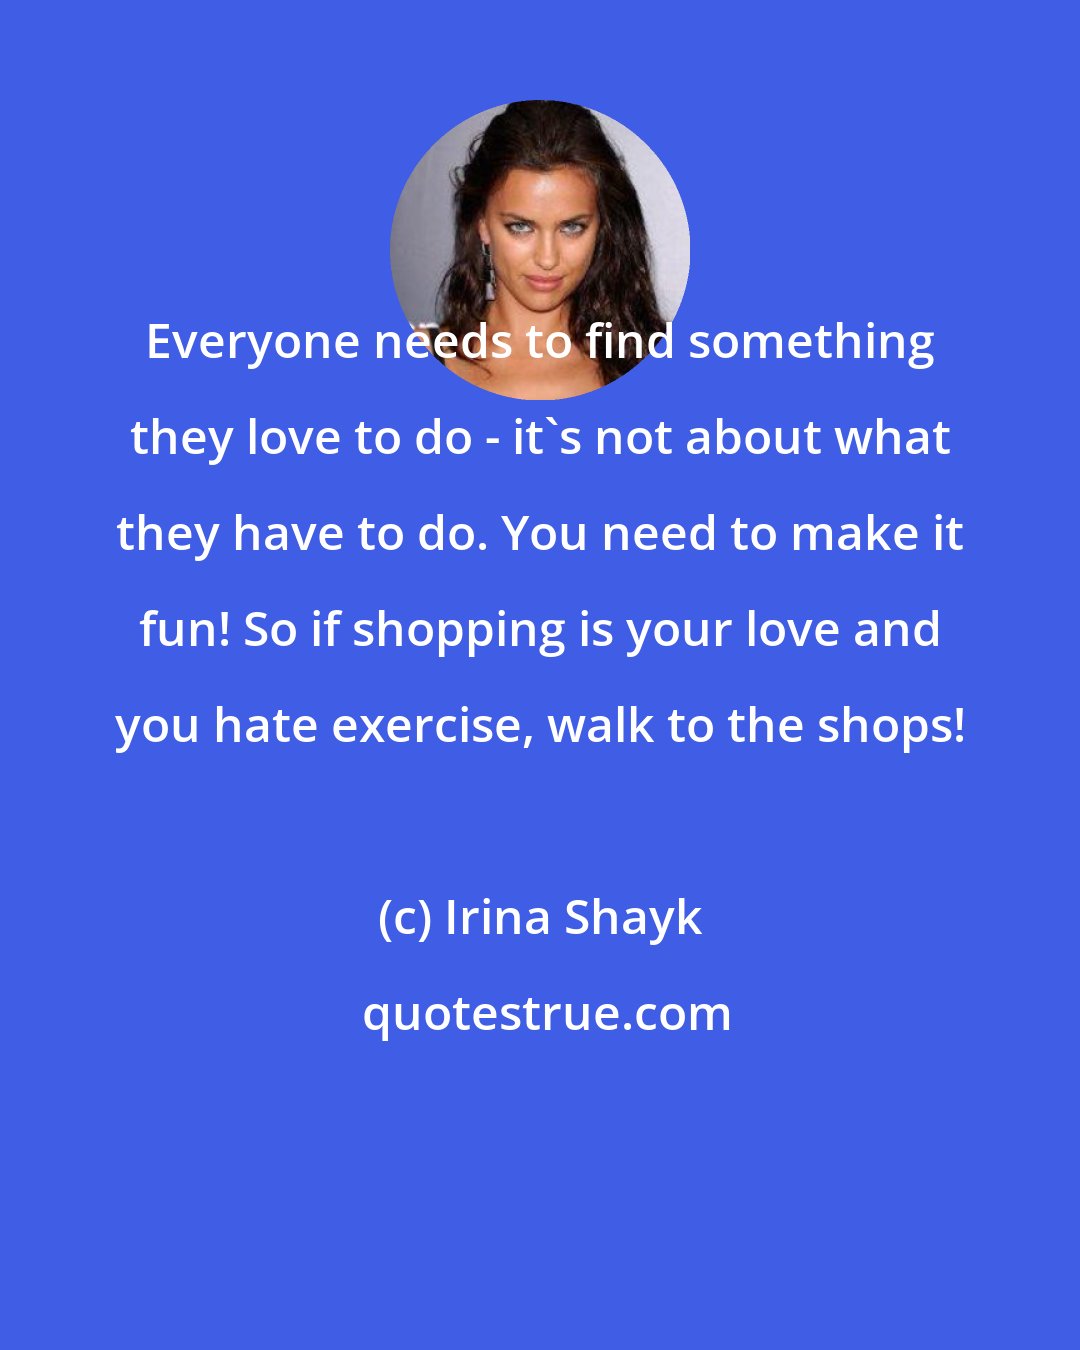 Irina Shayk: Everyone needs to find something they love to do - it's not about what they have to do. You need to make it fun! So if shopping is your love and you hate exercise, walk to the shops!